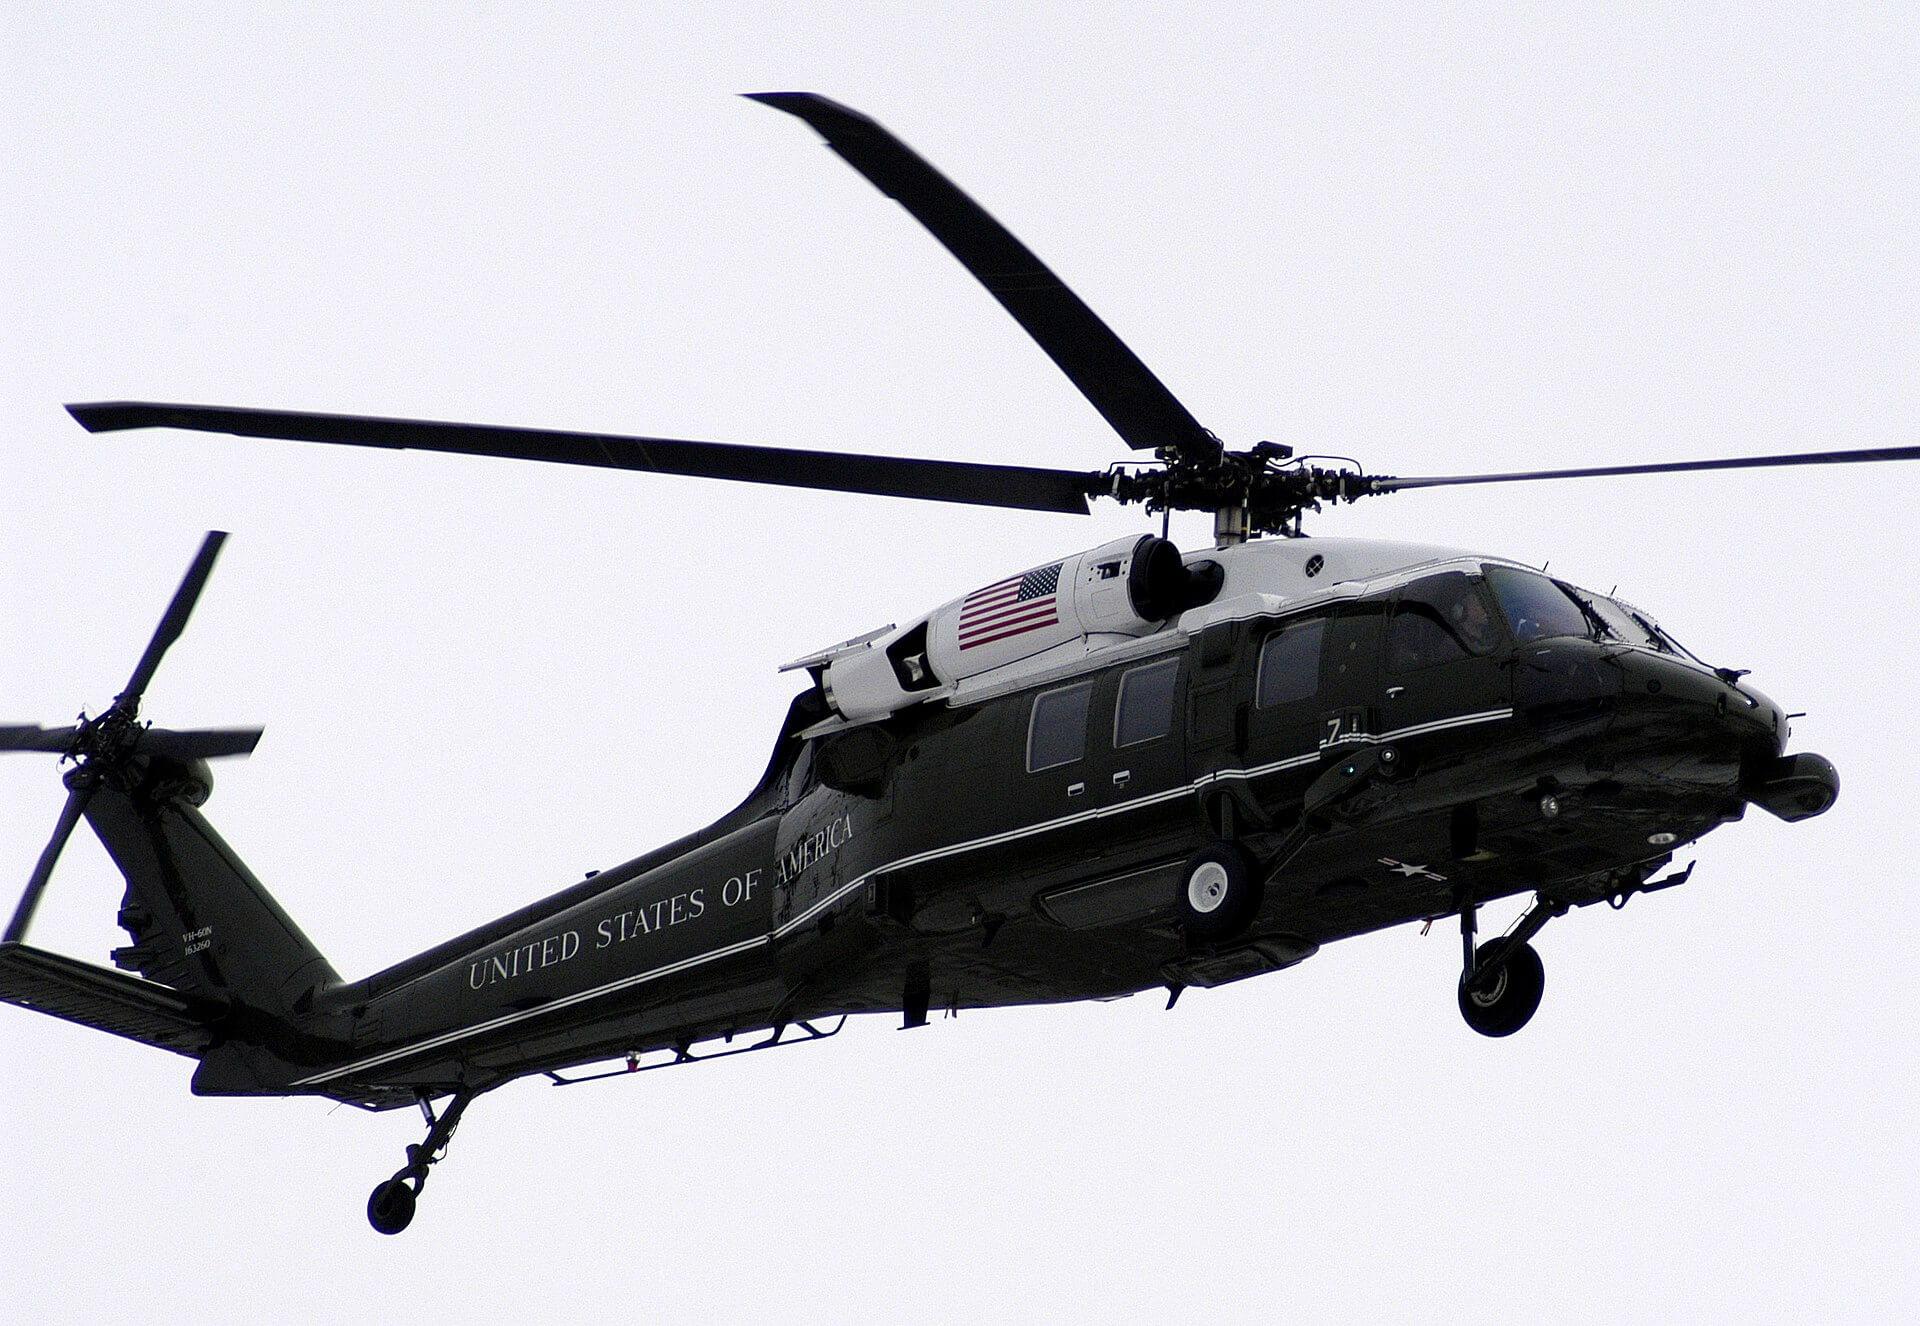 The President's helicopter—A U.S. Navy Sikorsky Vh-60N White Hawk in flight.